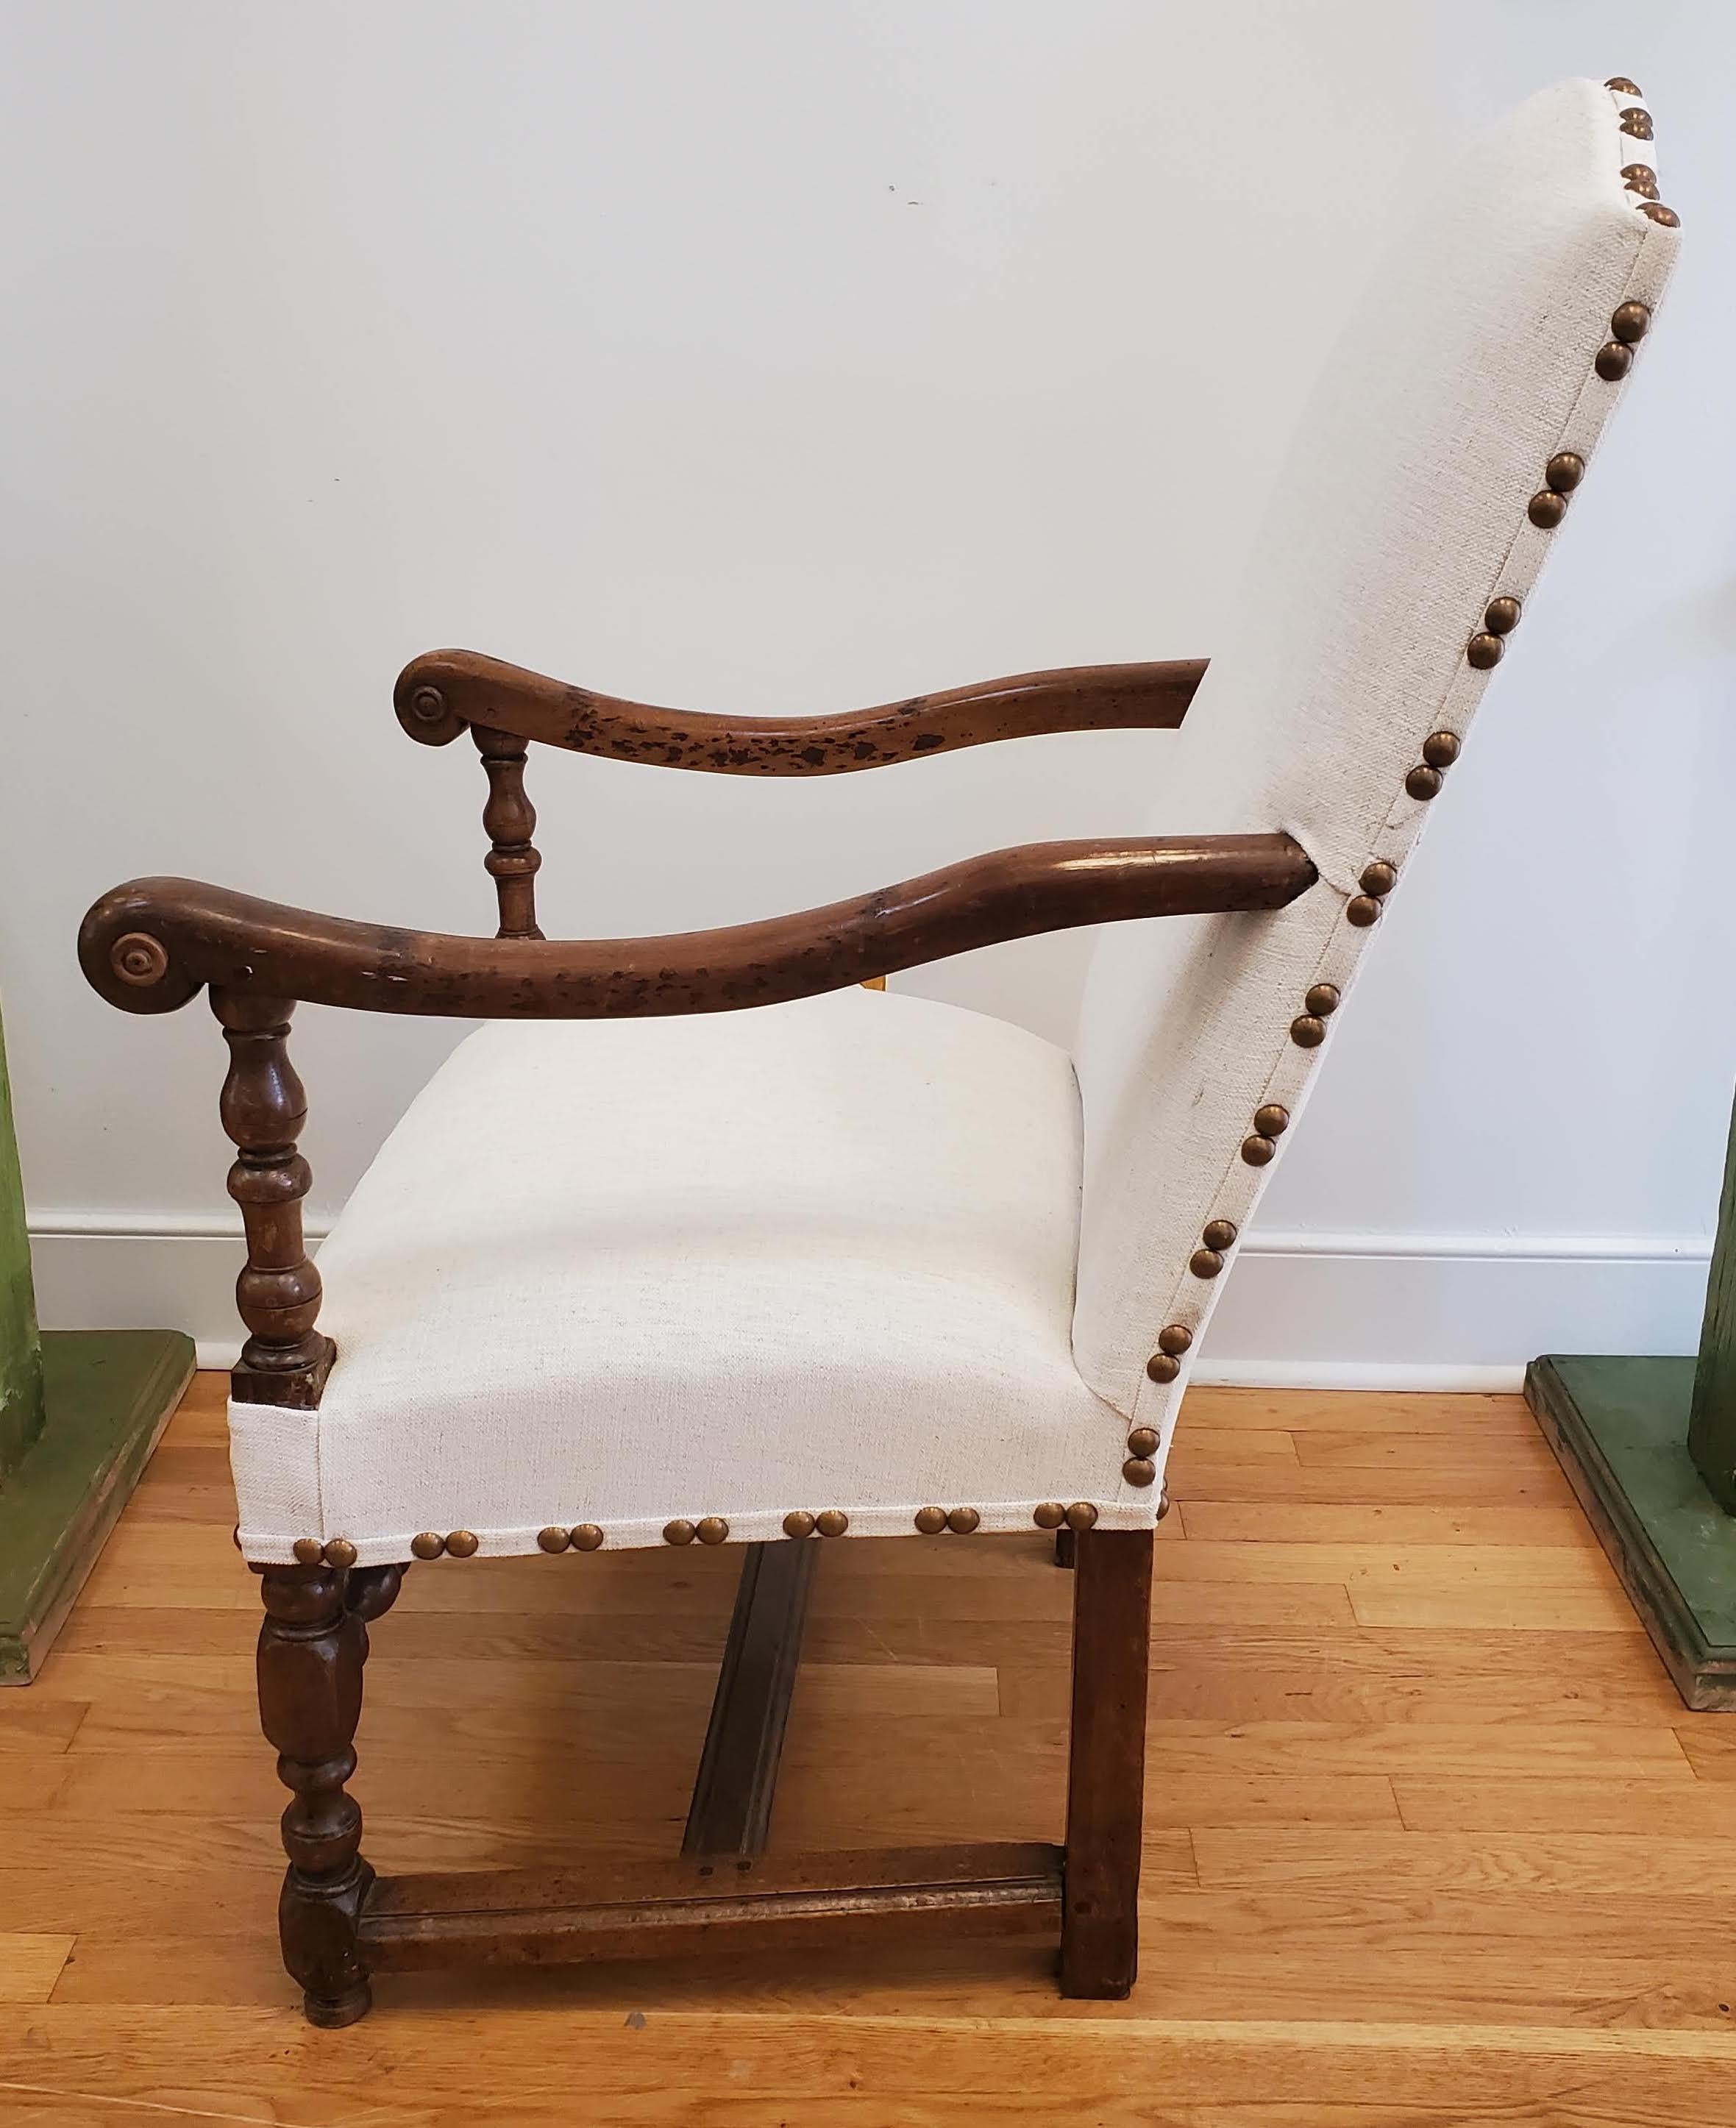 17th century Baroque French Provincial walnut armchair with modern upholstery arched back with sweeping arms with turned legs and stretchers. Made of deeply patinated walnut with a lustrous color. Remarkably comfortable. Recently reupholstered in